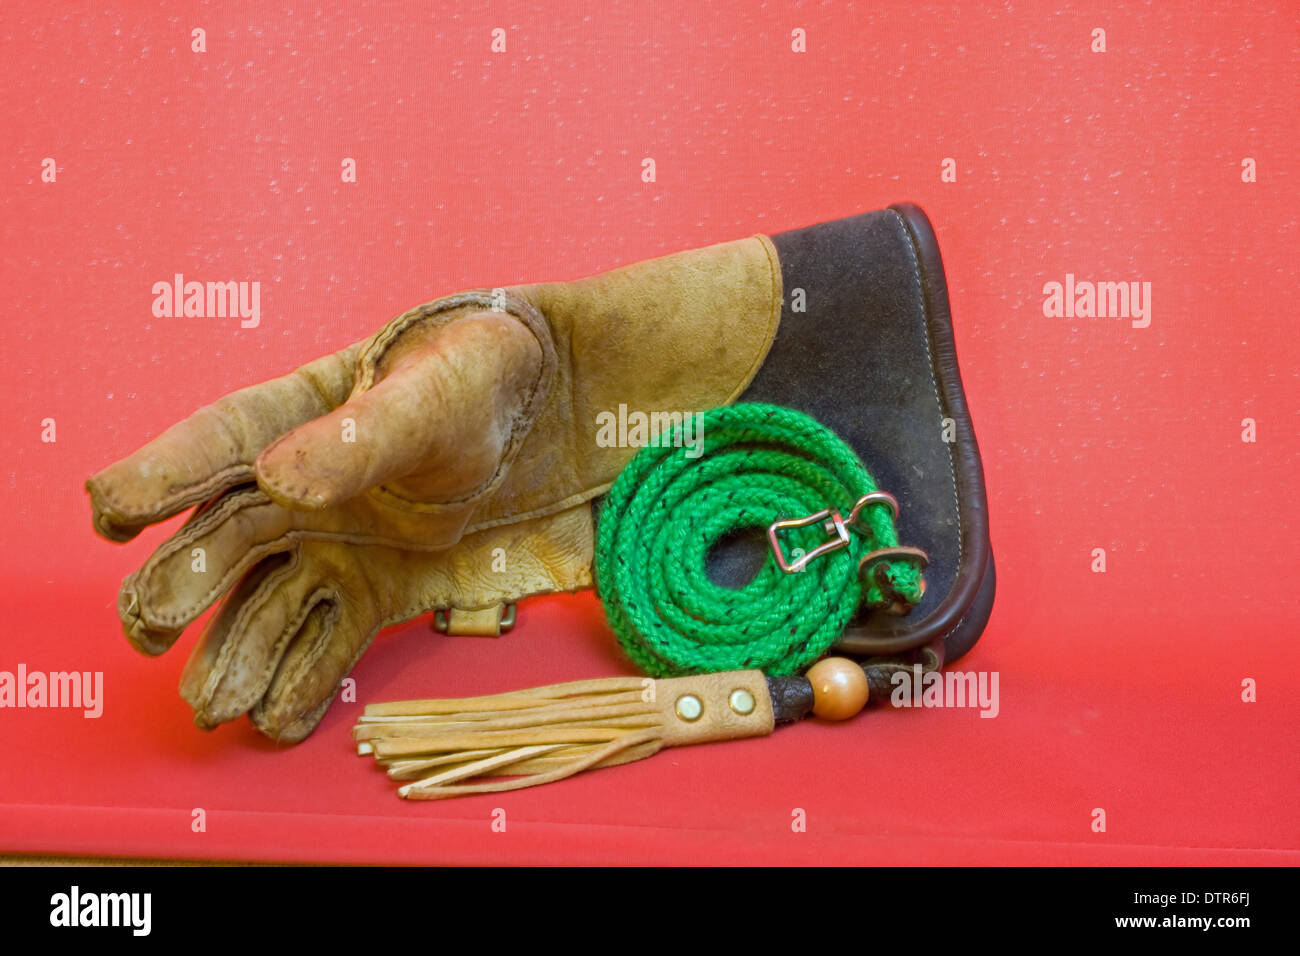 Falconry glove with tassel,leash and swivel. Stock Photo